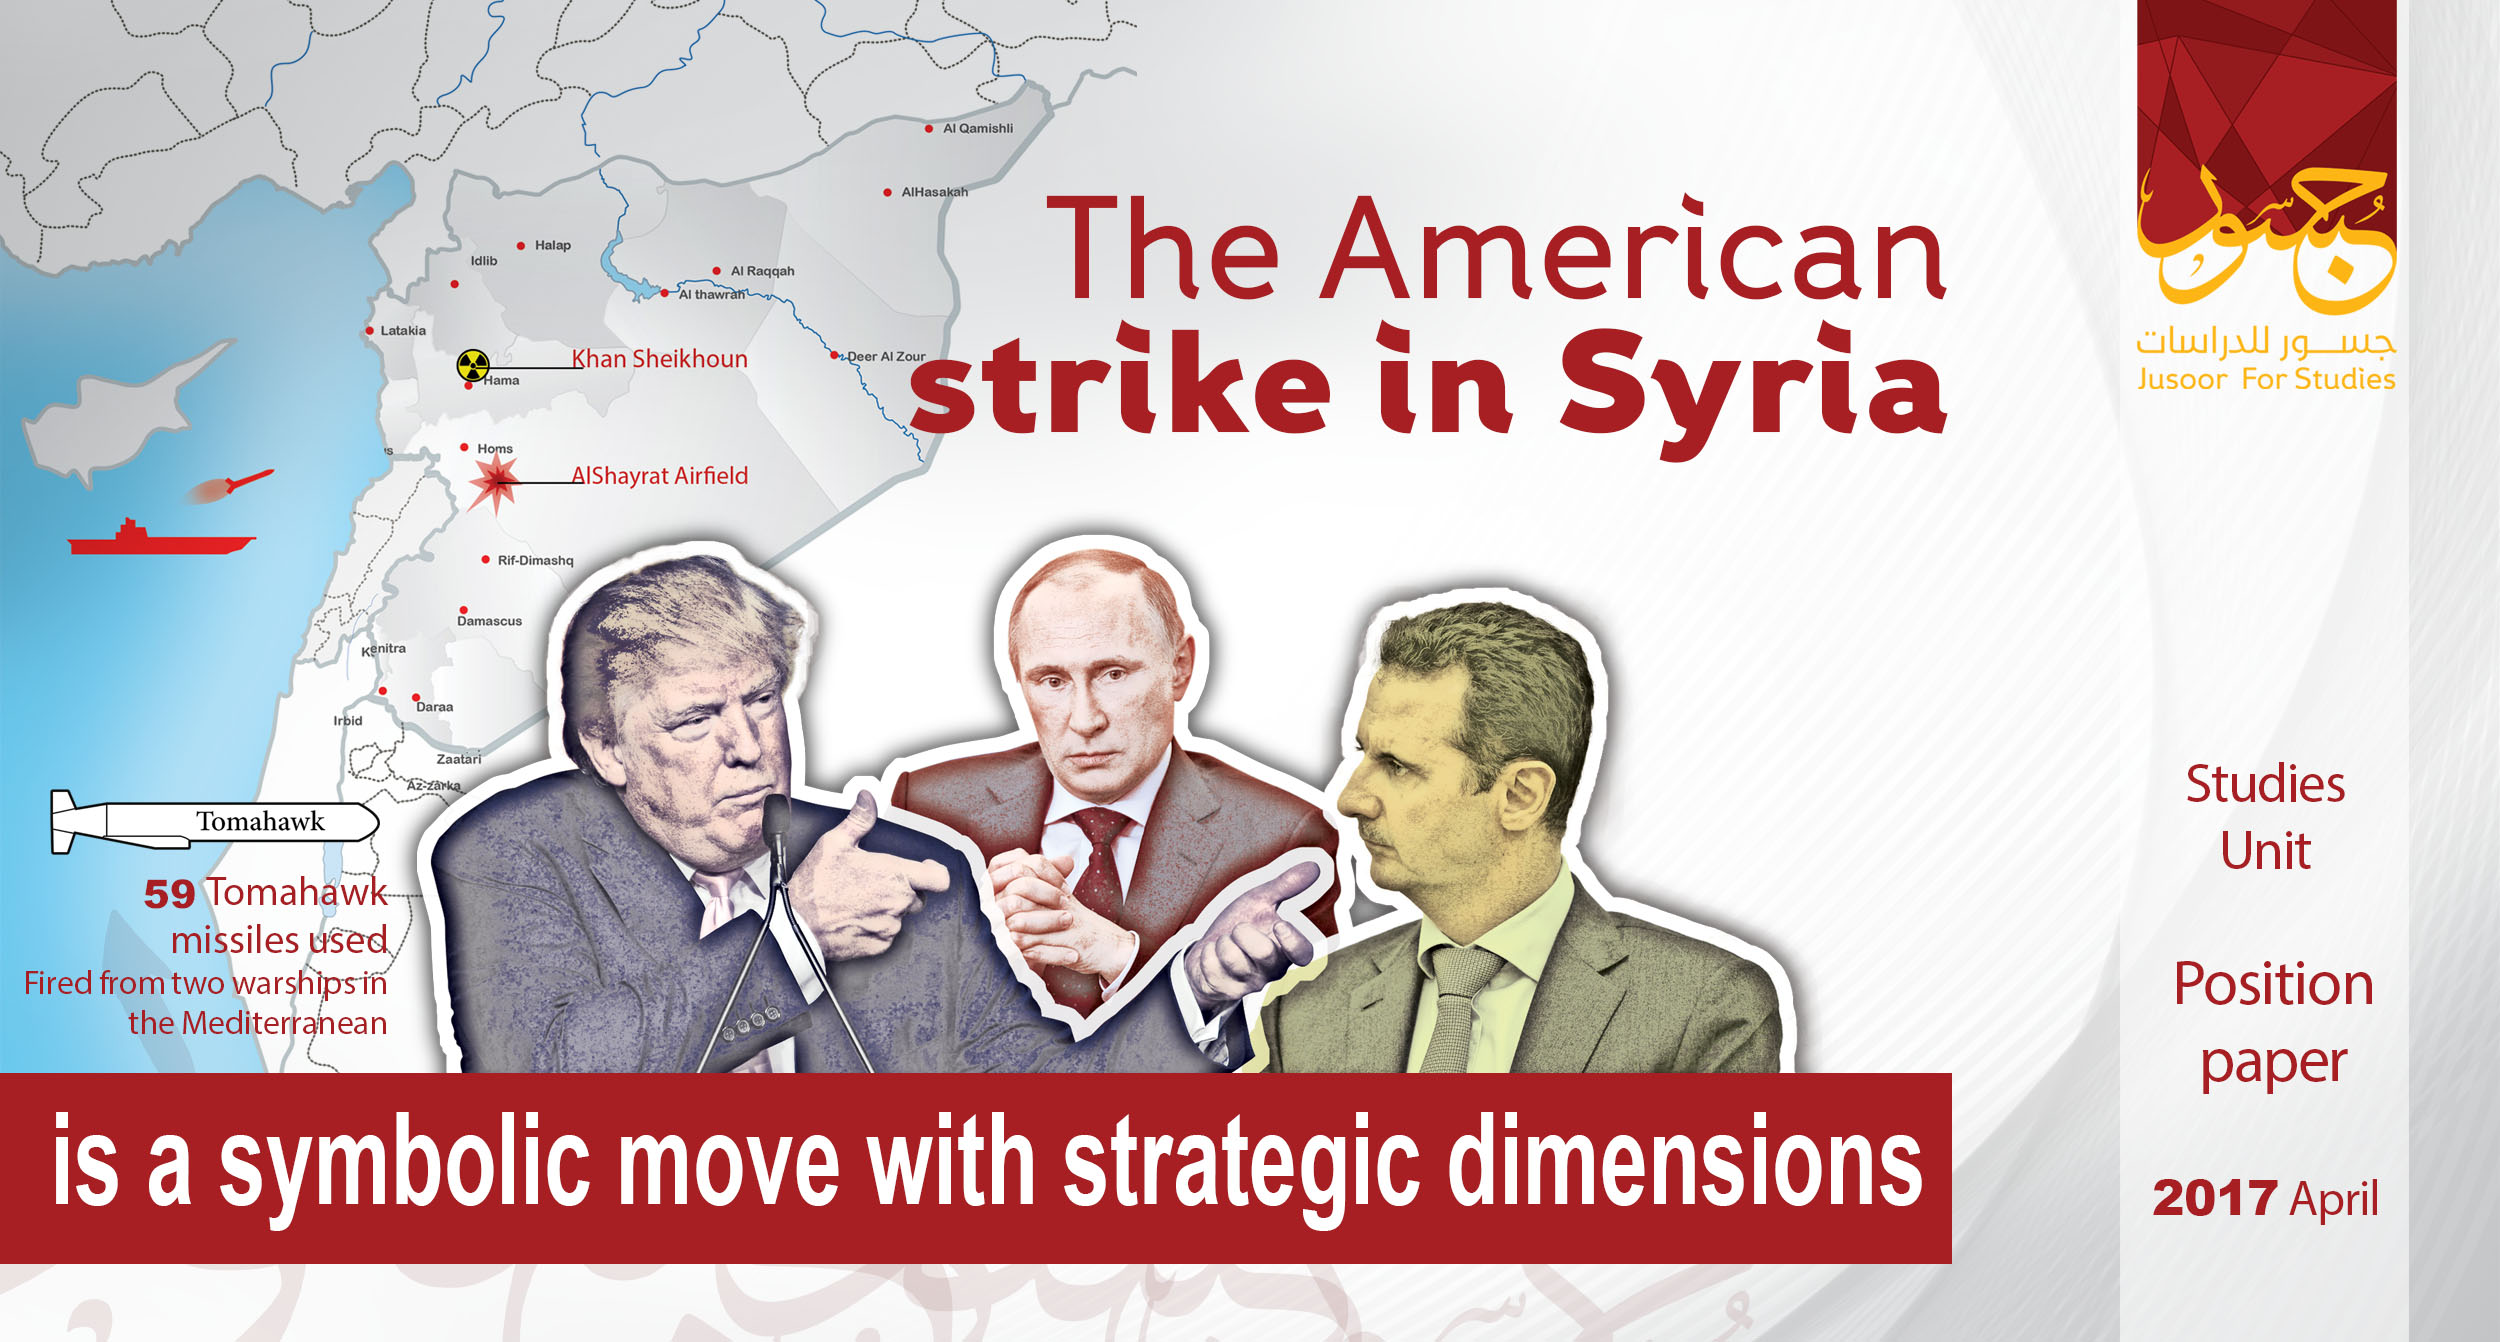 The American strike in Syria is a symbolic move with strategic dimensions